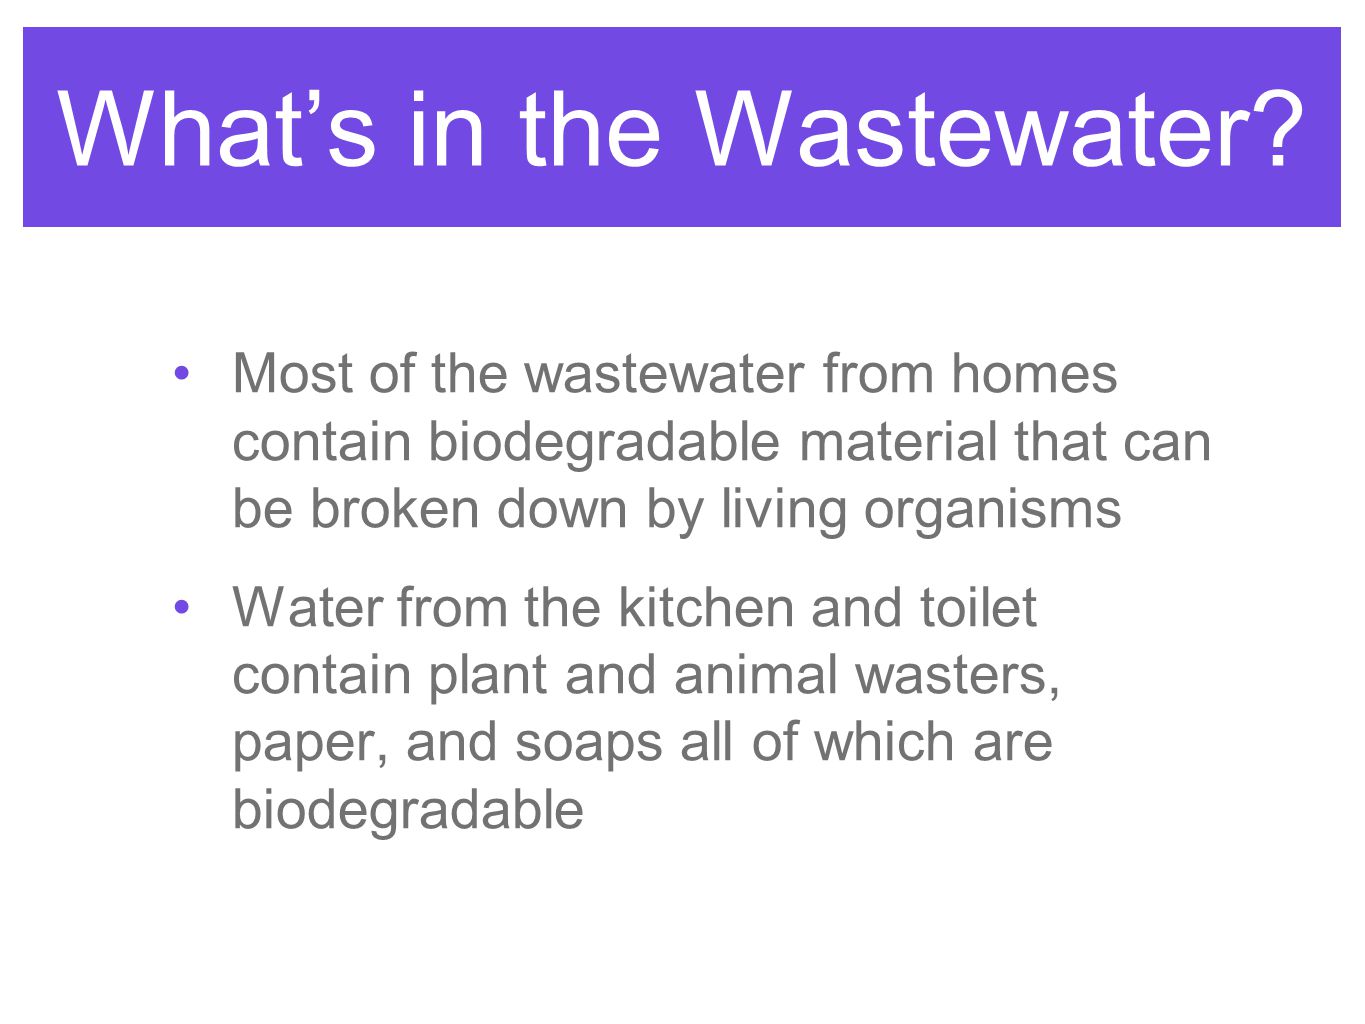 What’s in the Wastewater